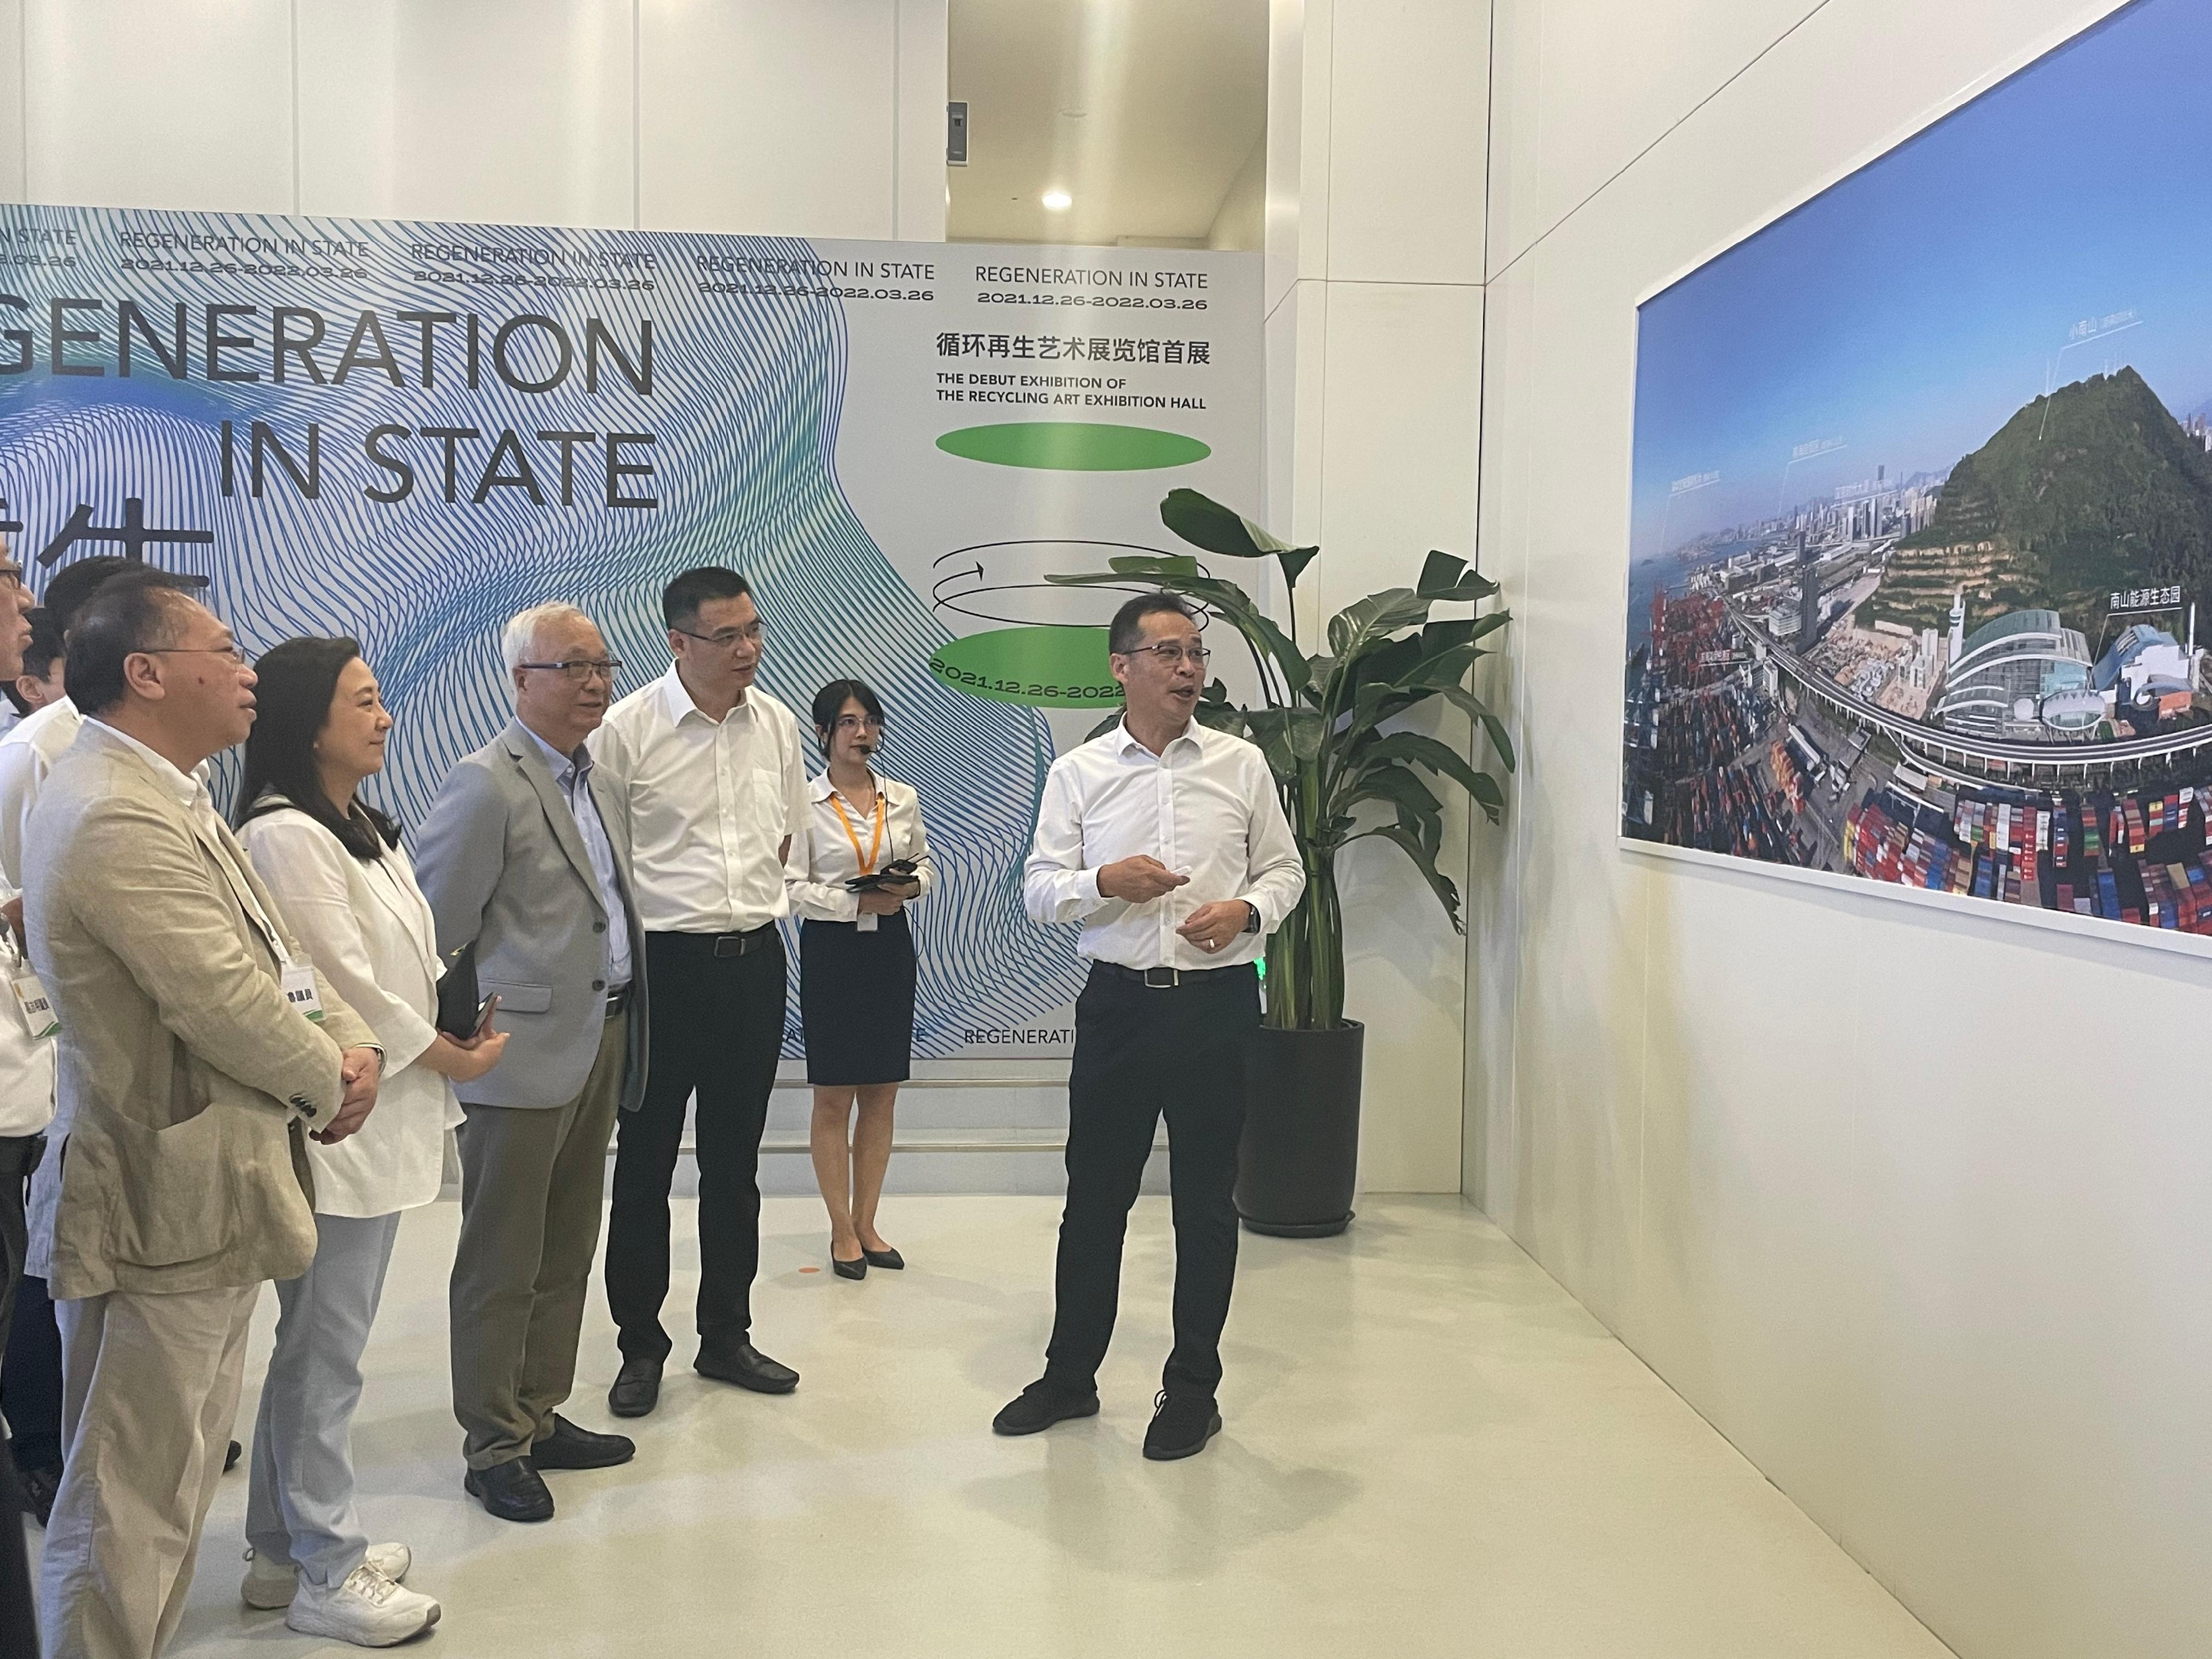 The Secretary for Environment and Ecology, Mr Tse Chin-wan, together with the Legislative Council Panel on Environmental Affairs, today (August 9) visited the Nanshan Energy Eco-Park in Shenzhen in the afternoon. Photo shows Mr Tse (fourth right), and the delegation of the Legislative Council Panel on Environmental Affairs, receiving a briefing from a representative on the operation of the Park.